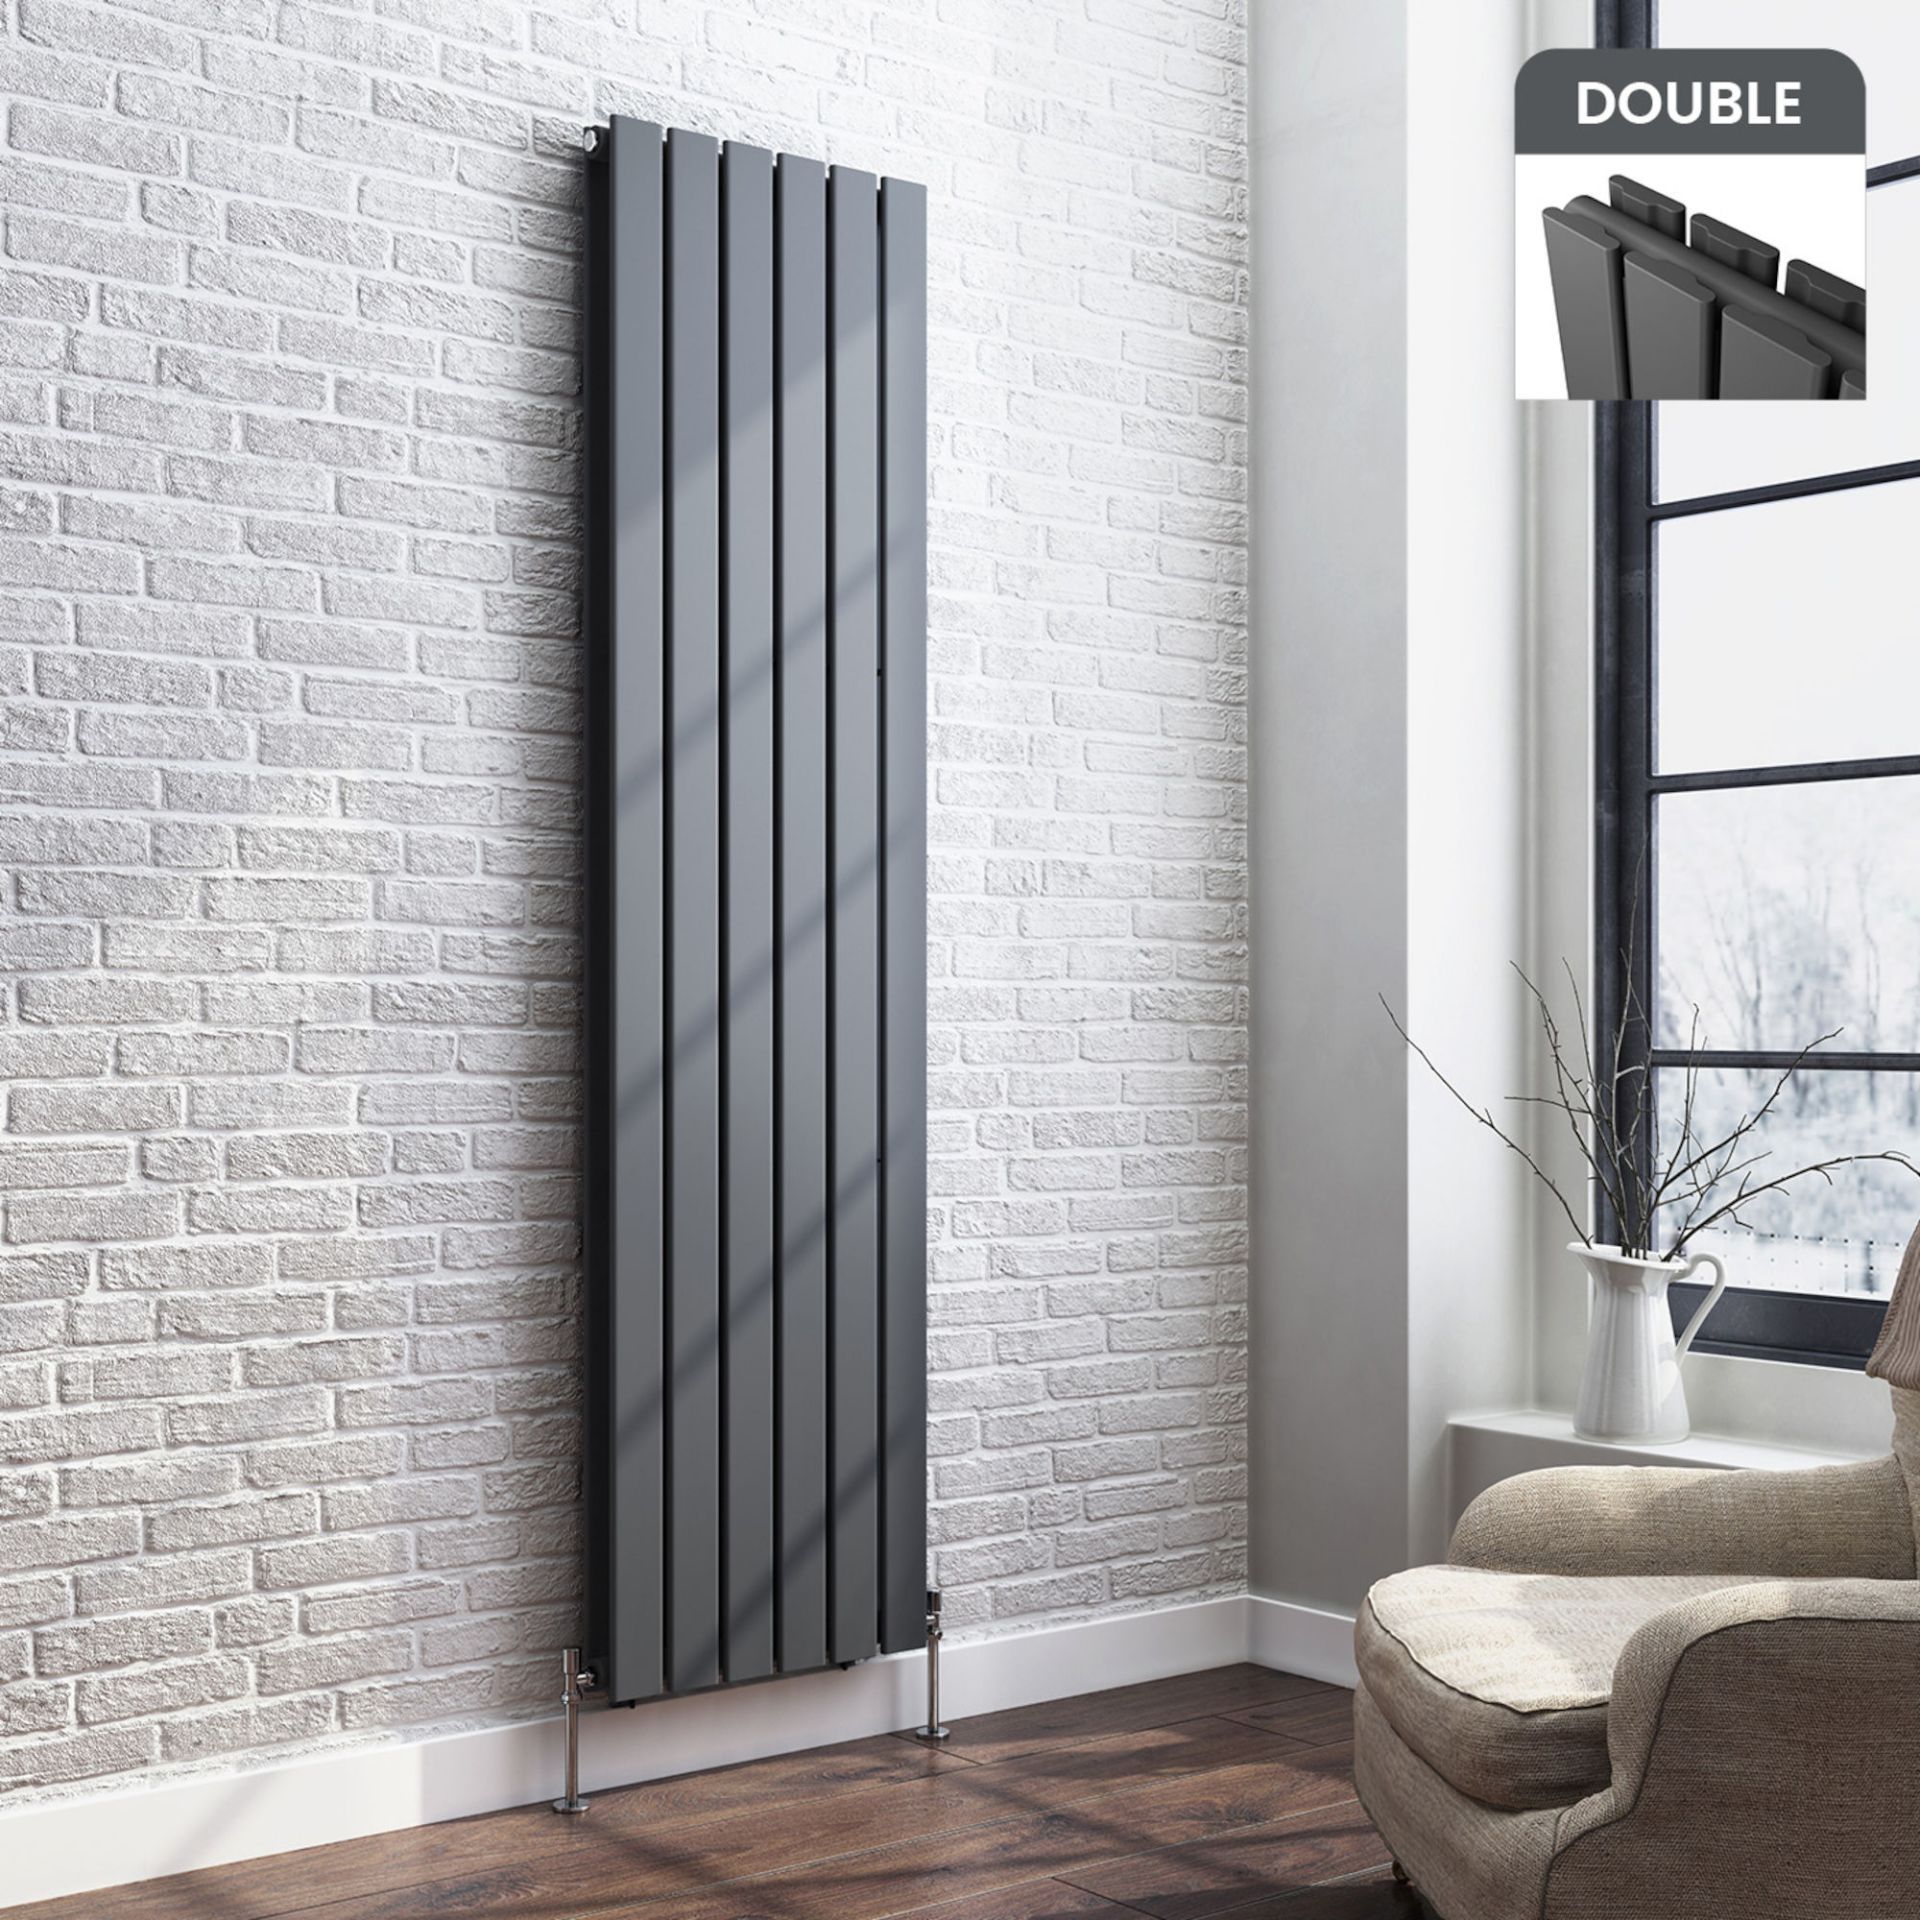 1600x360mm Anthracite Double Flat Panel Vertical Radiator. RRP £369.99. This stylised additio...